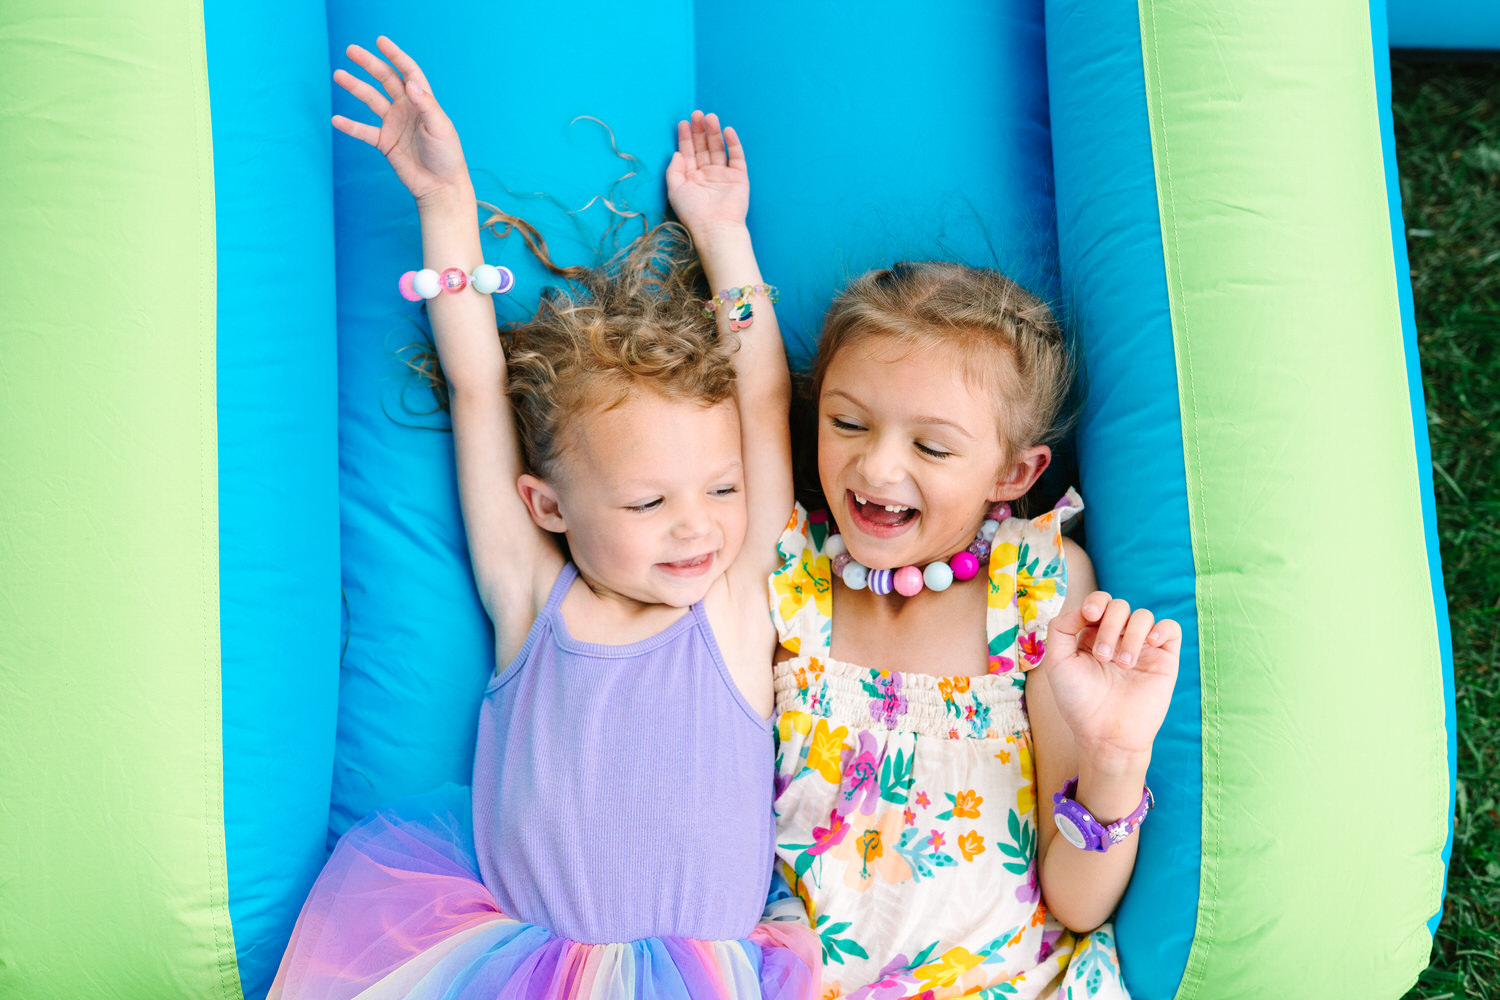 Two young sisters laughing together on an inflatable slide, captured by lifestyle photographer Daisy Zimmer